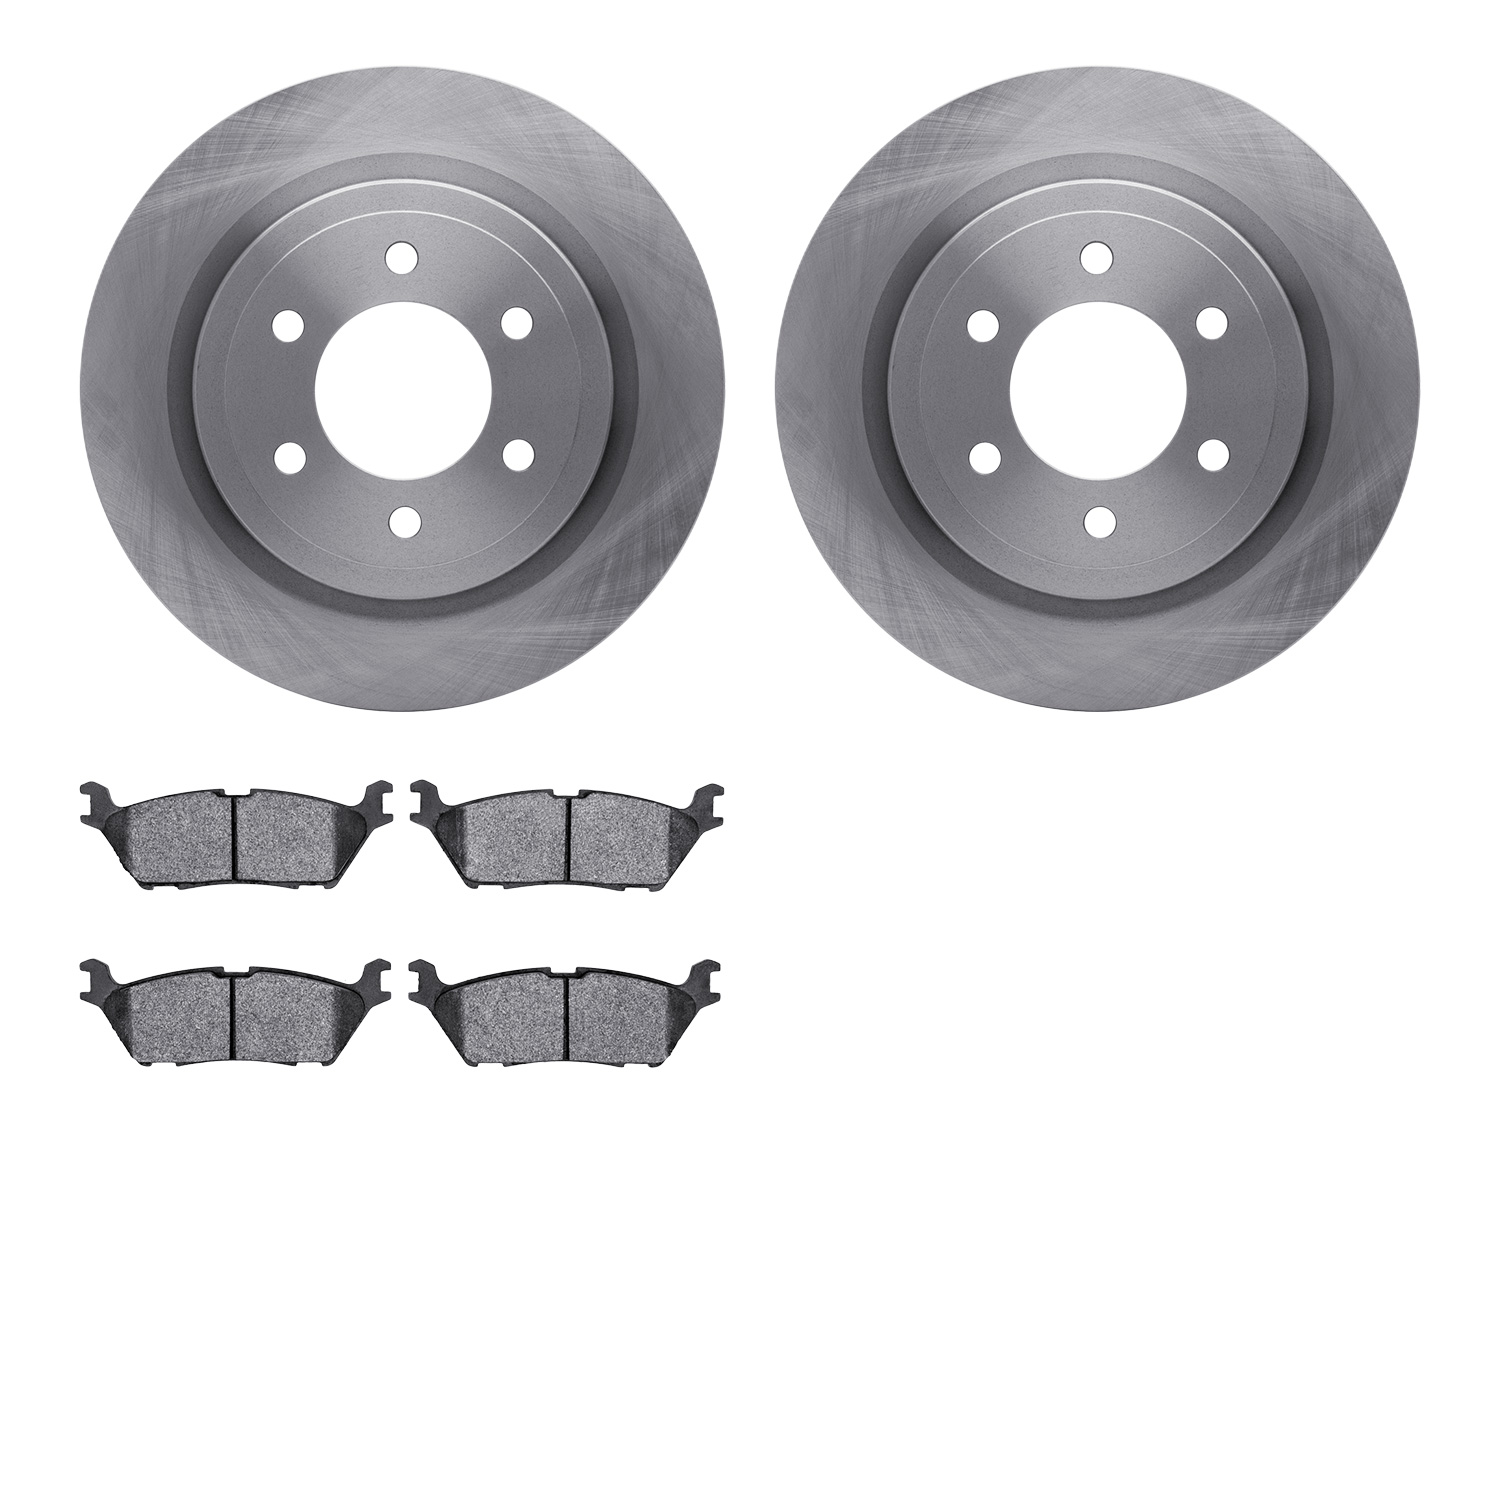 6402-54332 Brake Rotors with Ultimate-Duty Brake Pads, 2018-2021 Ford/Lincoln/Mercury/Mazda, Position: Rear